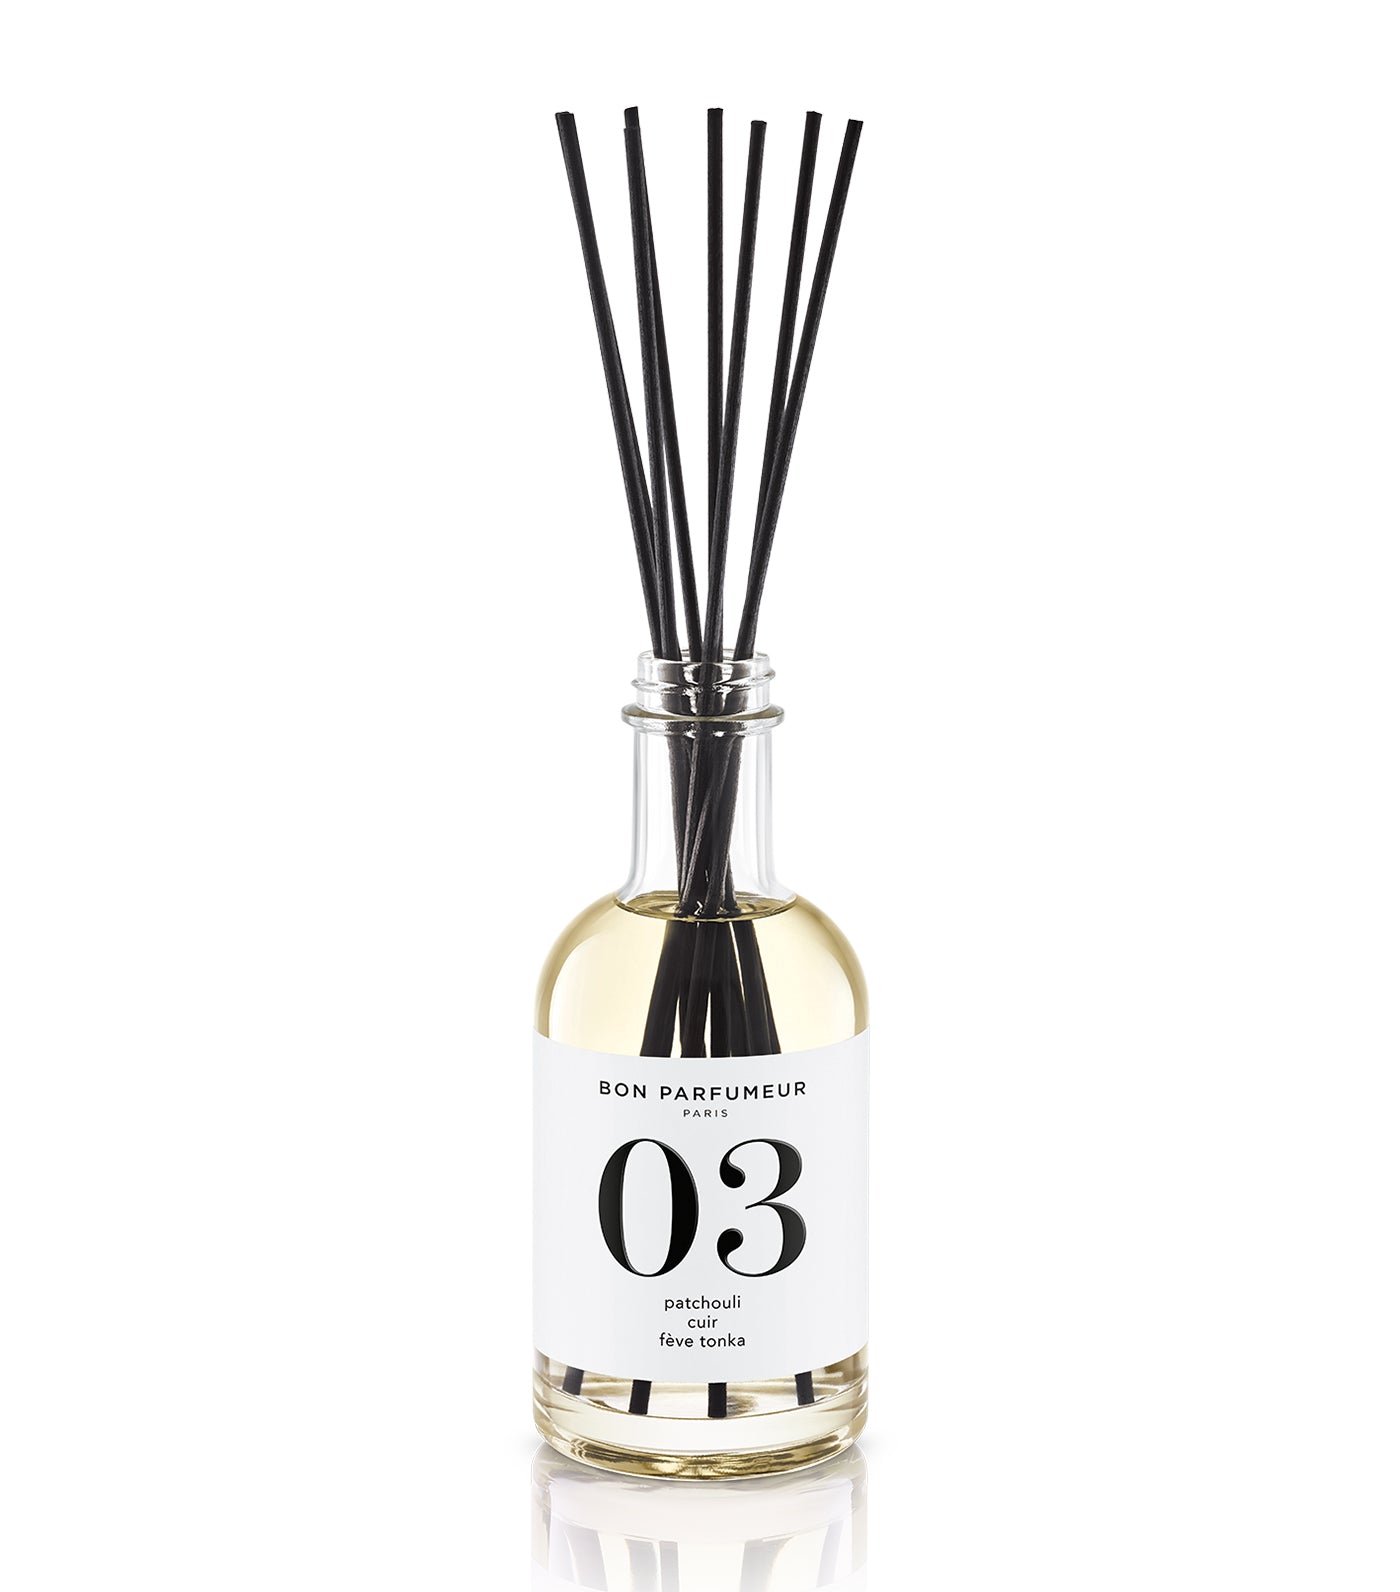 03 Home Fragrance Diffuser : patchouli, leather, tonka bean